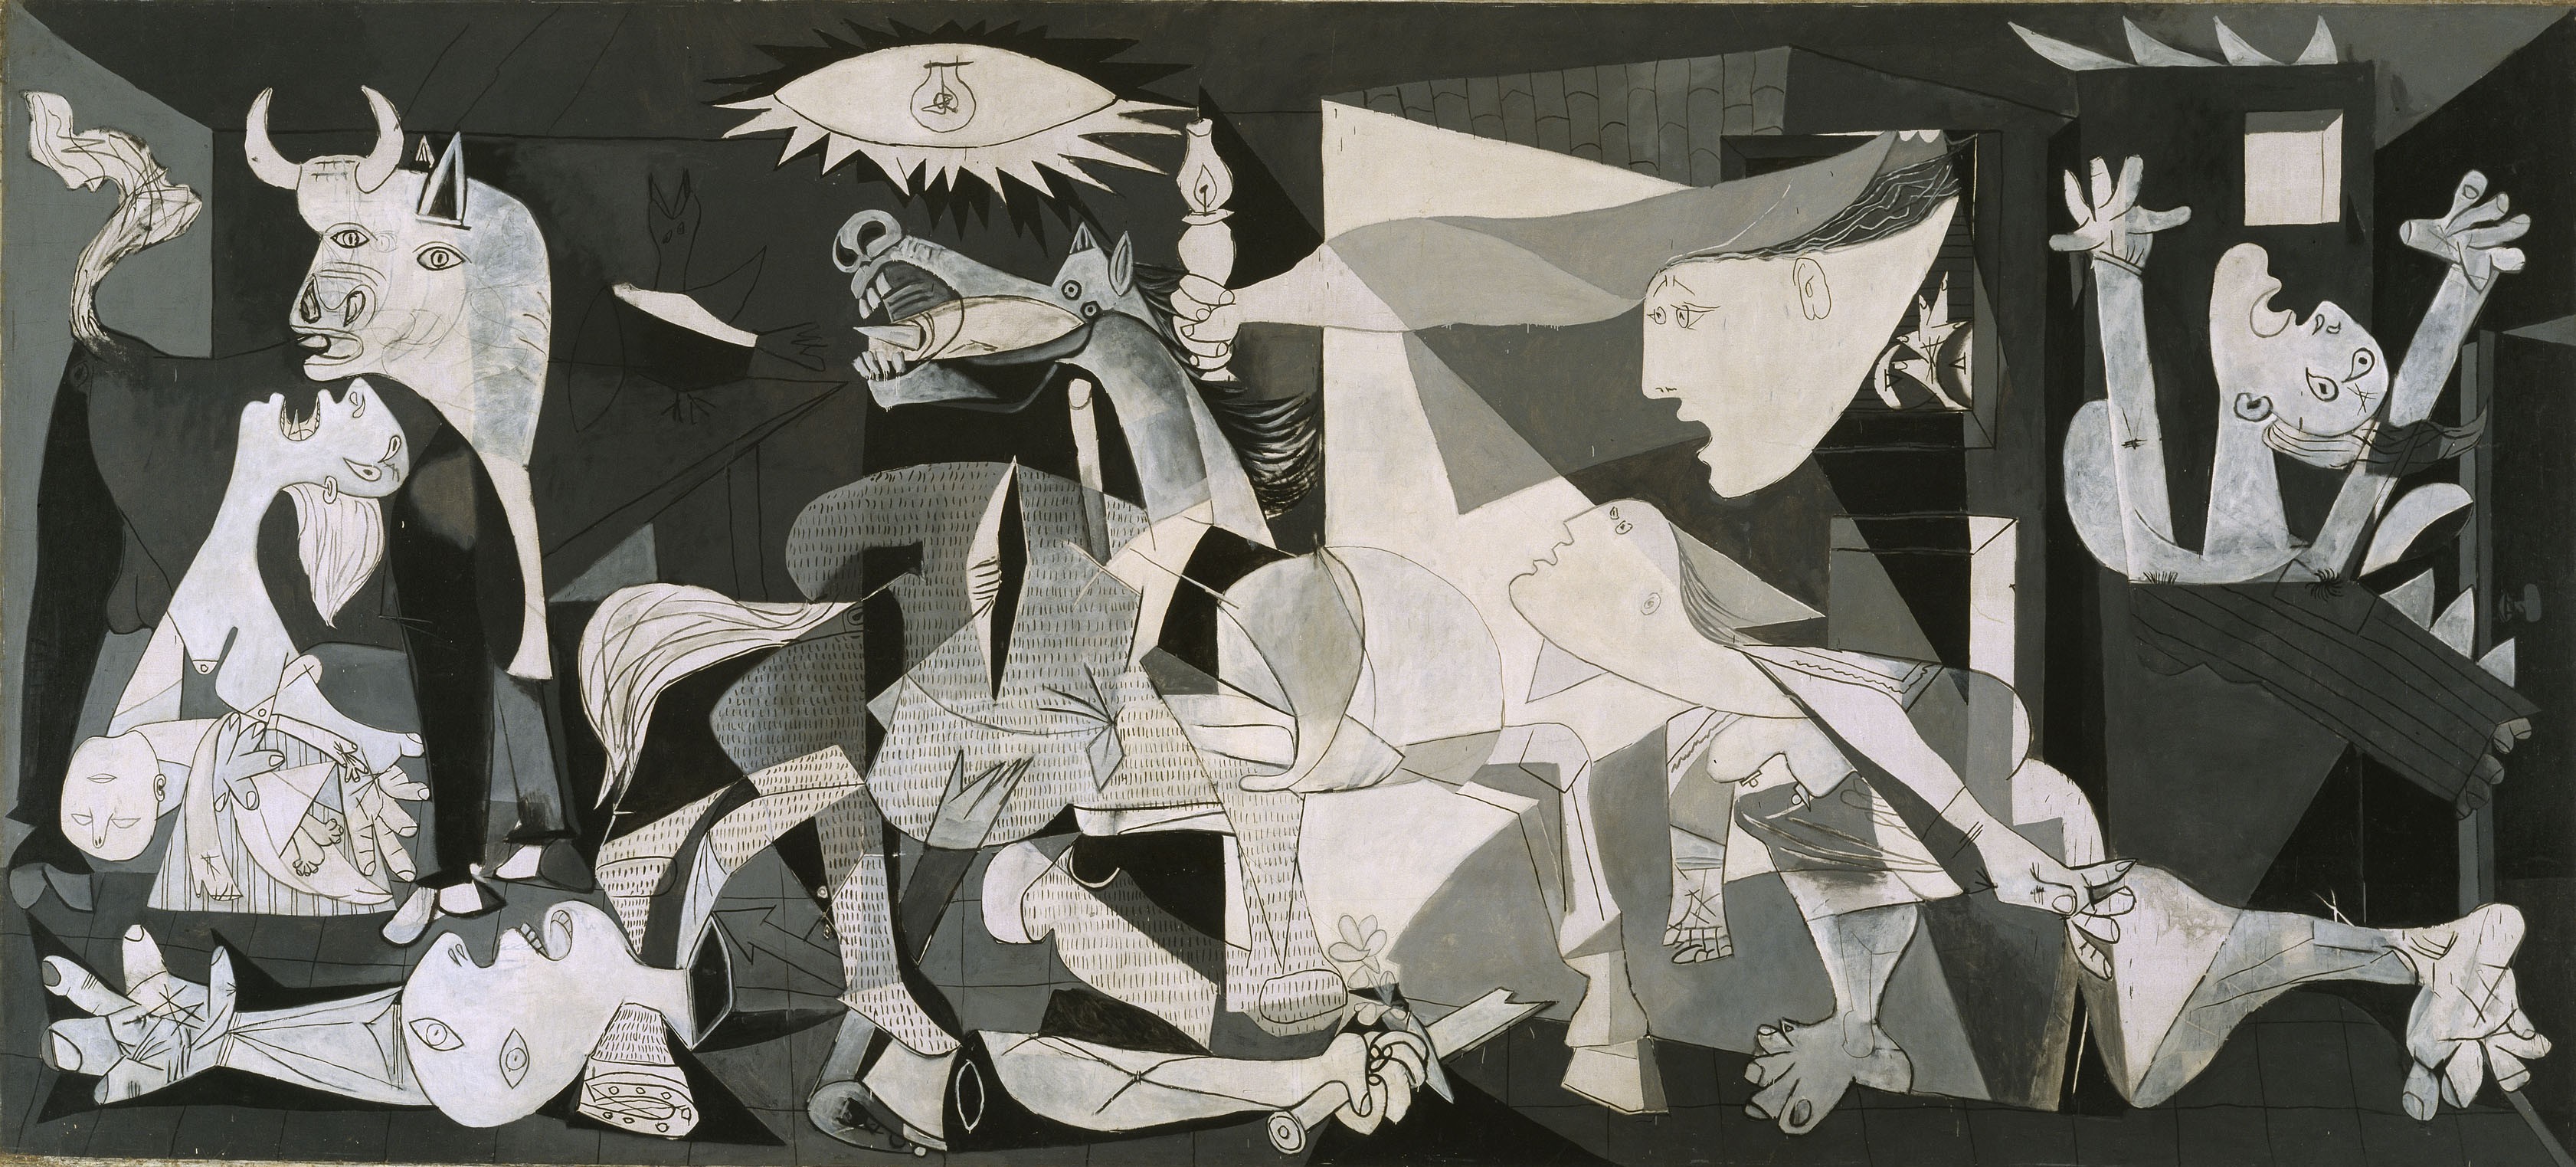 What does the horse represent in Pablo Picasso's painting?